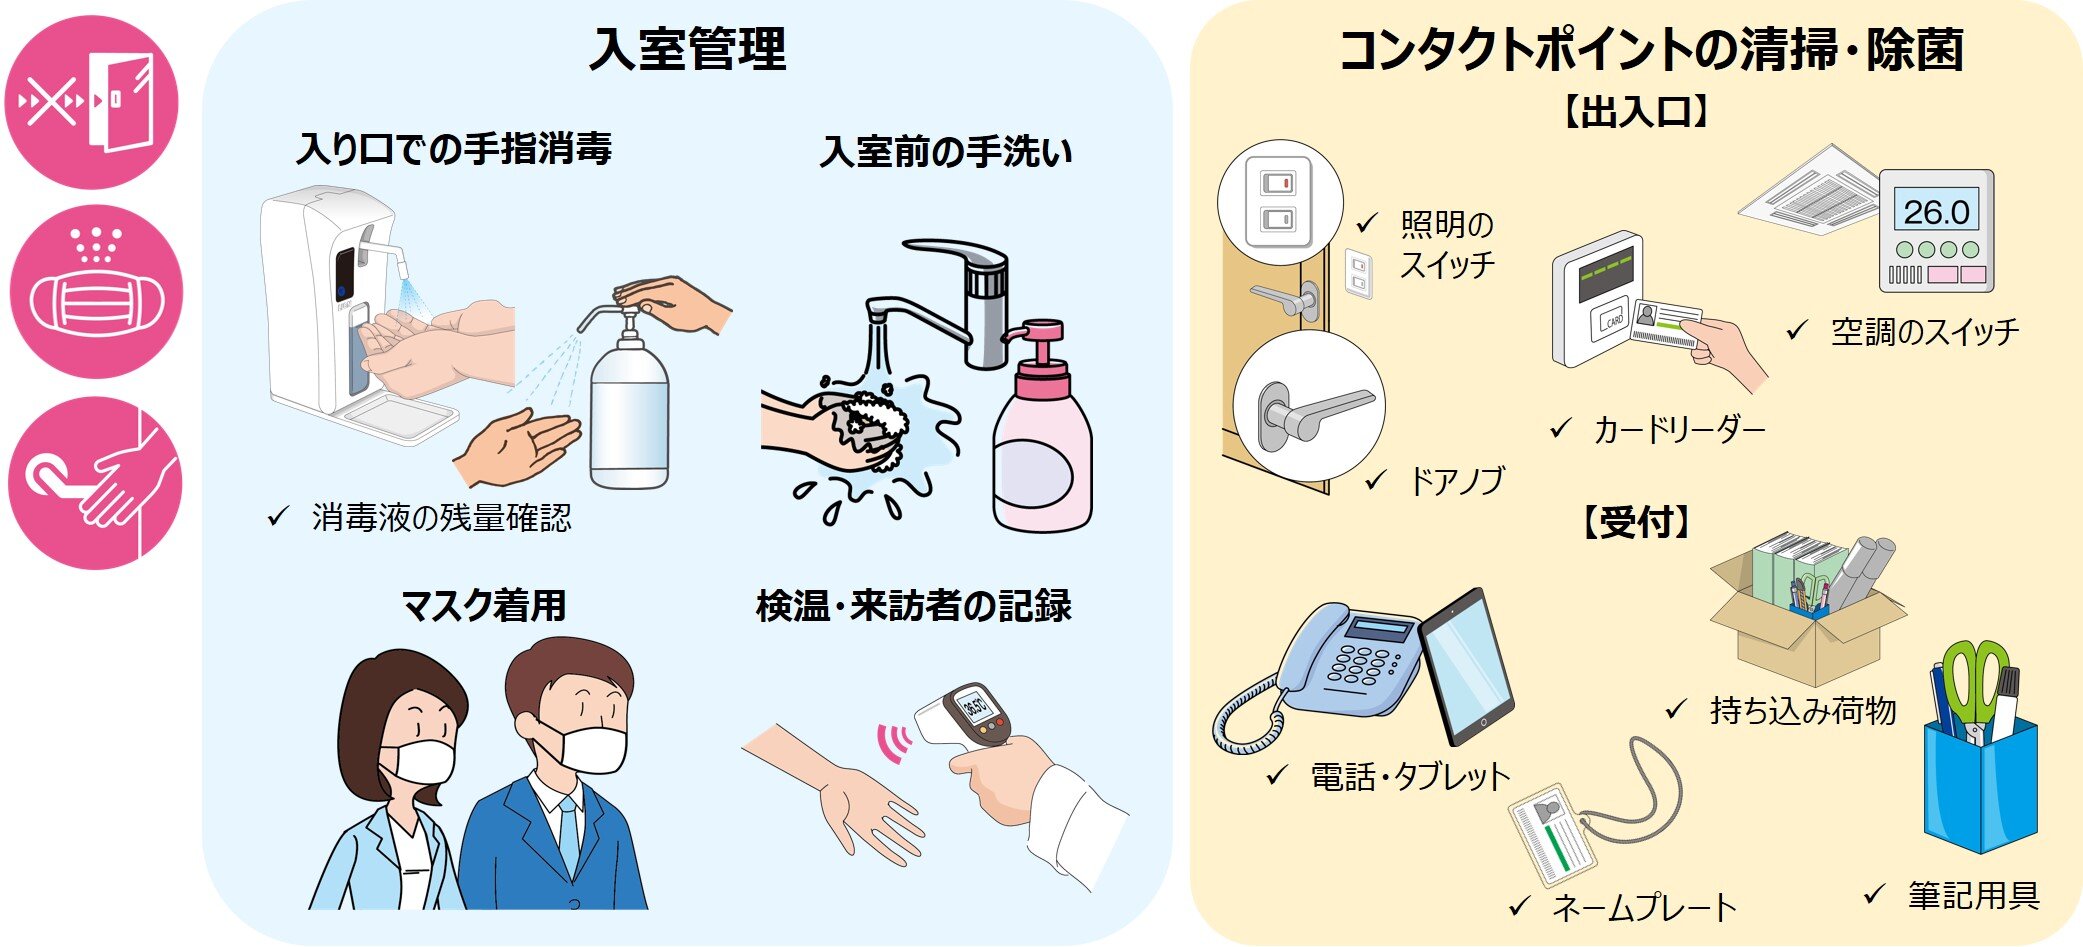 49-2_Infectious_countermeasures_infection_control_office_01.jpg